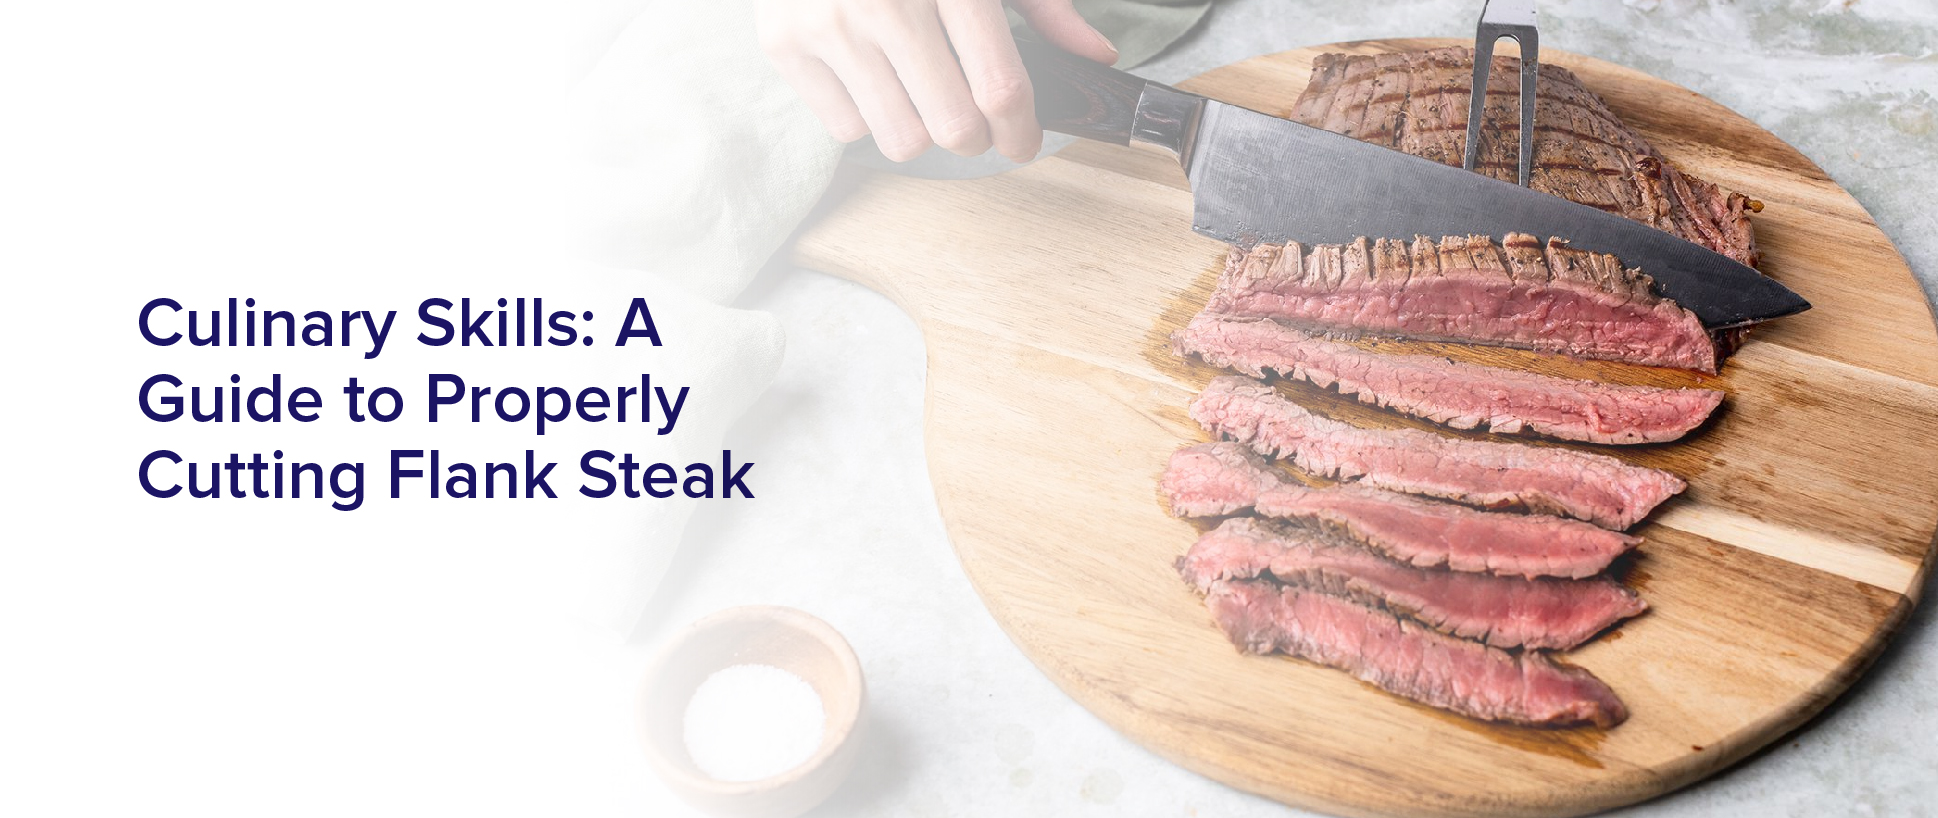 Culinary Skills: A Guide To Properly Cutting Flank Steak”